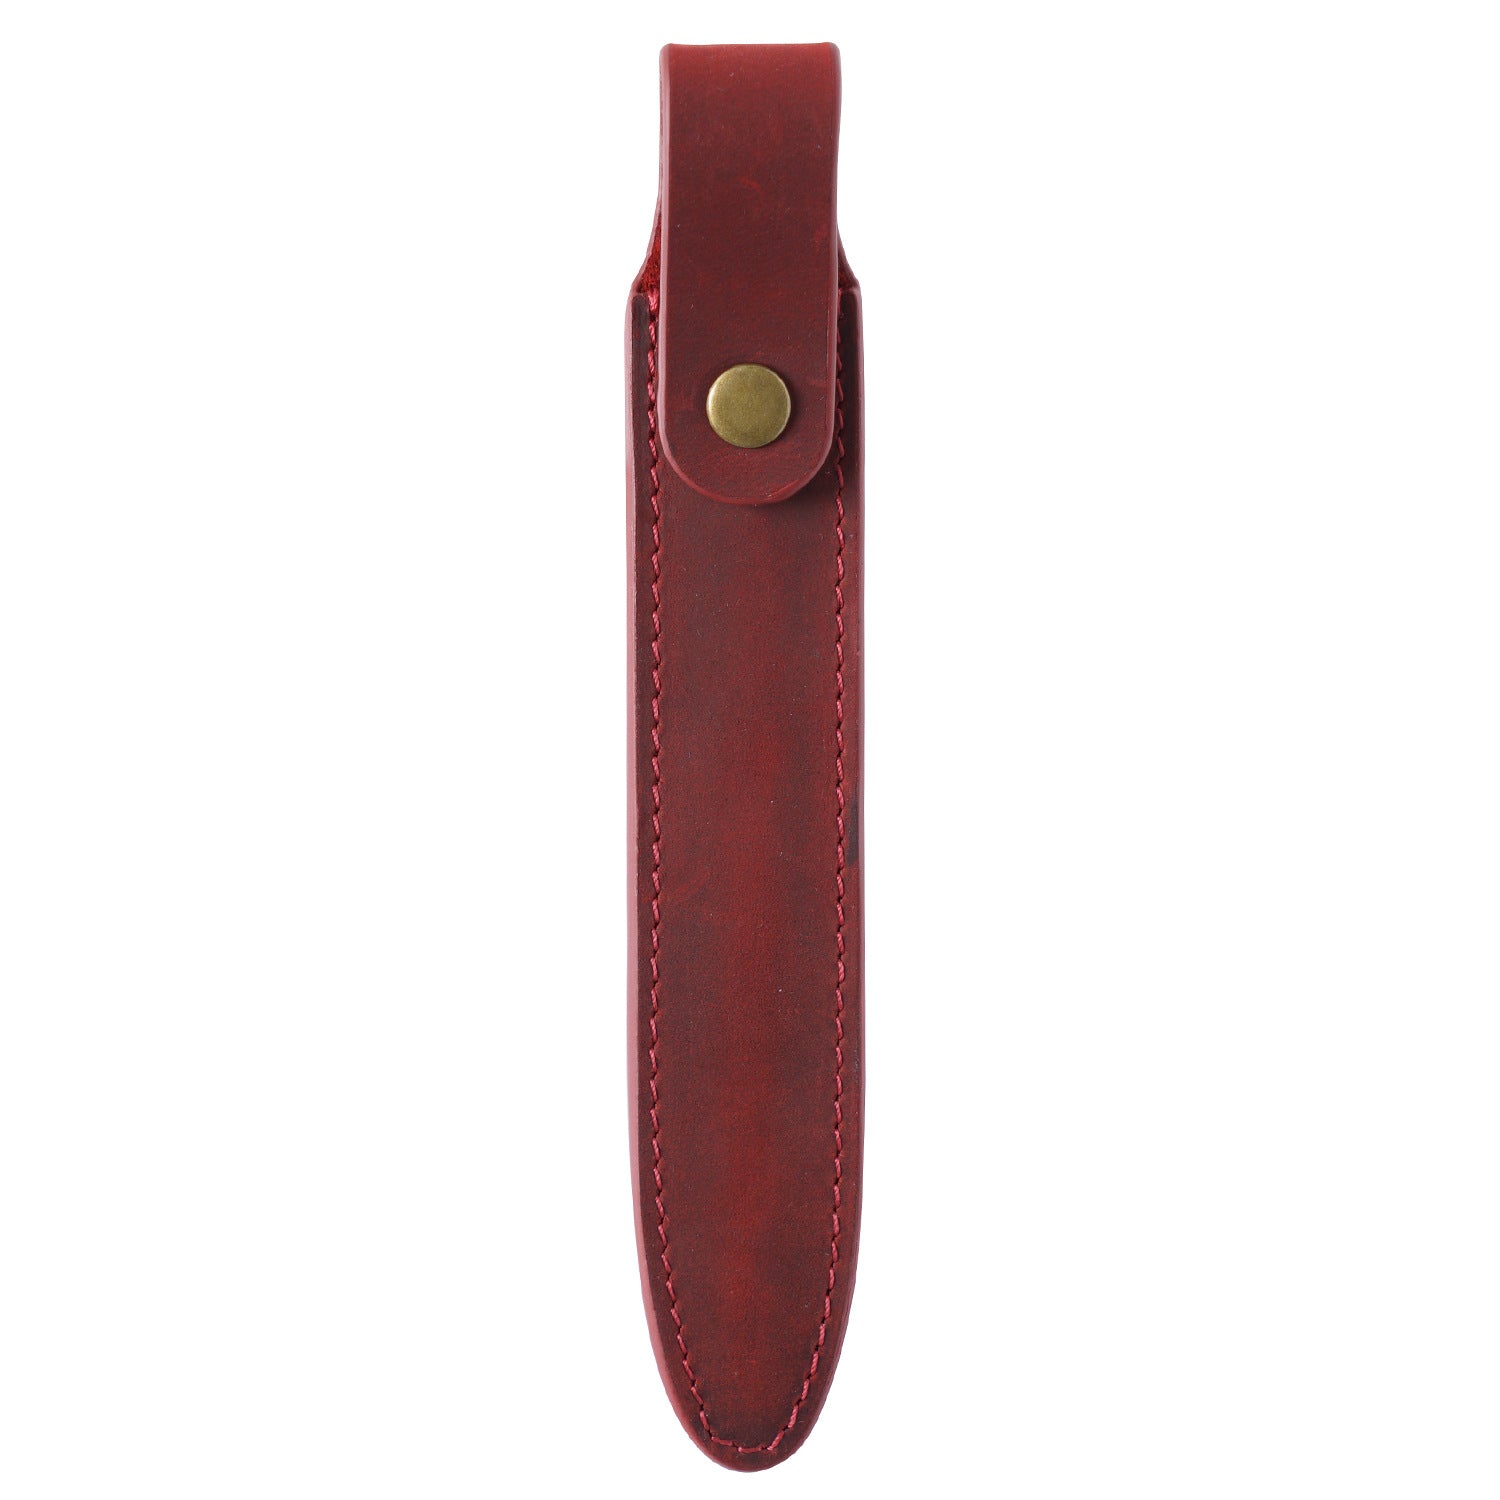 Vintage Leather Protect Pen Case P102-pen holder-Wine Red-Free Shipping Leatheretro